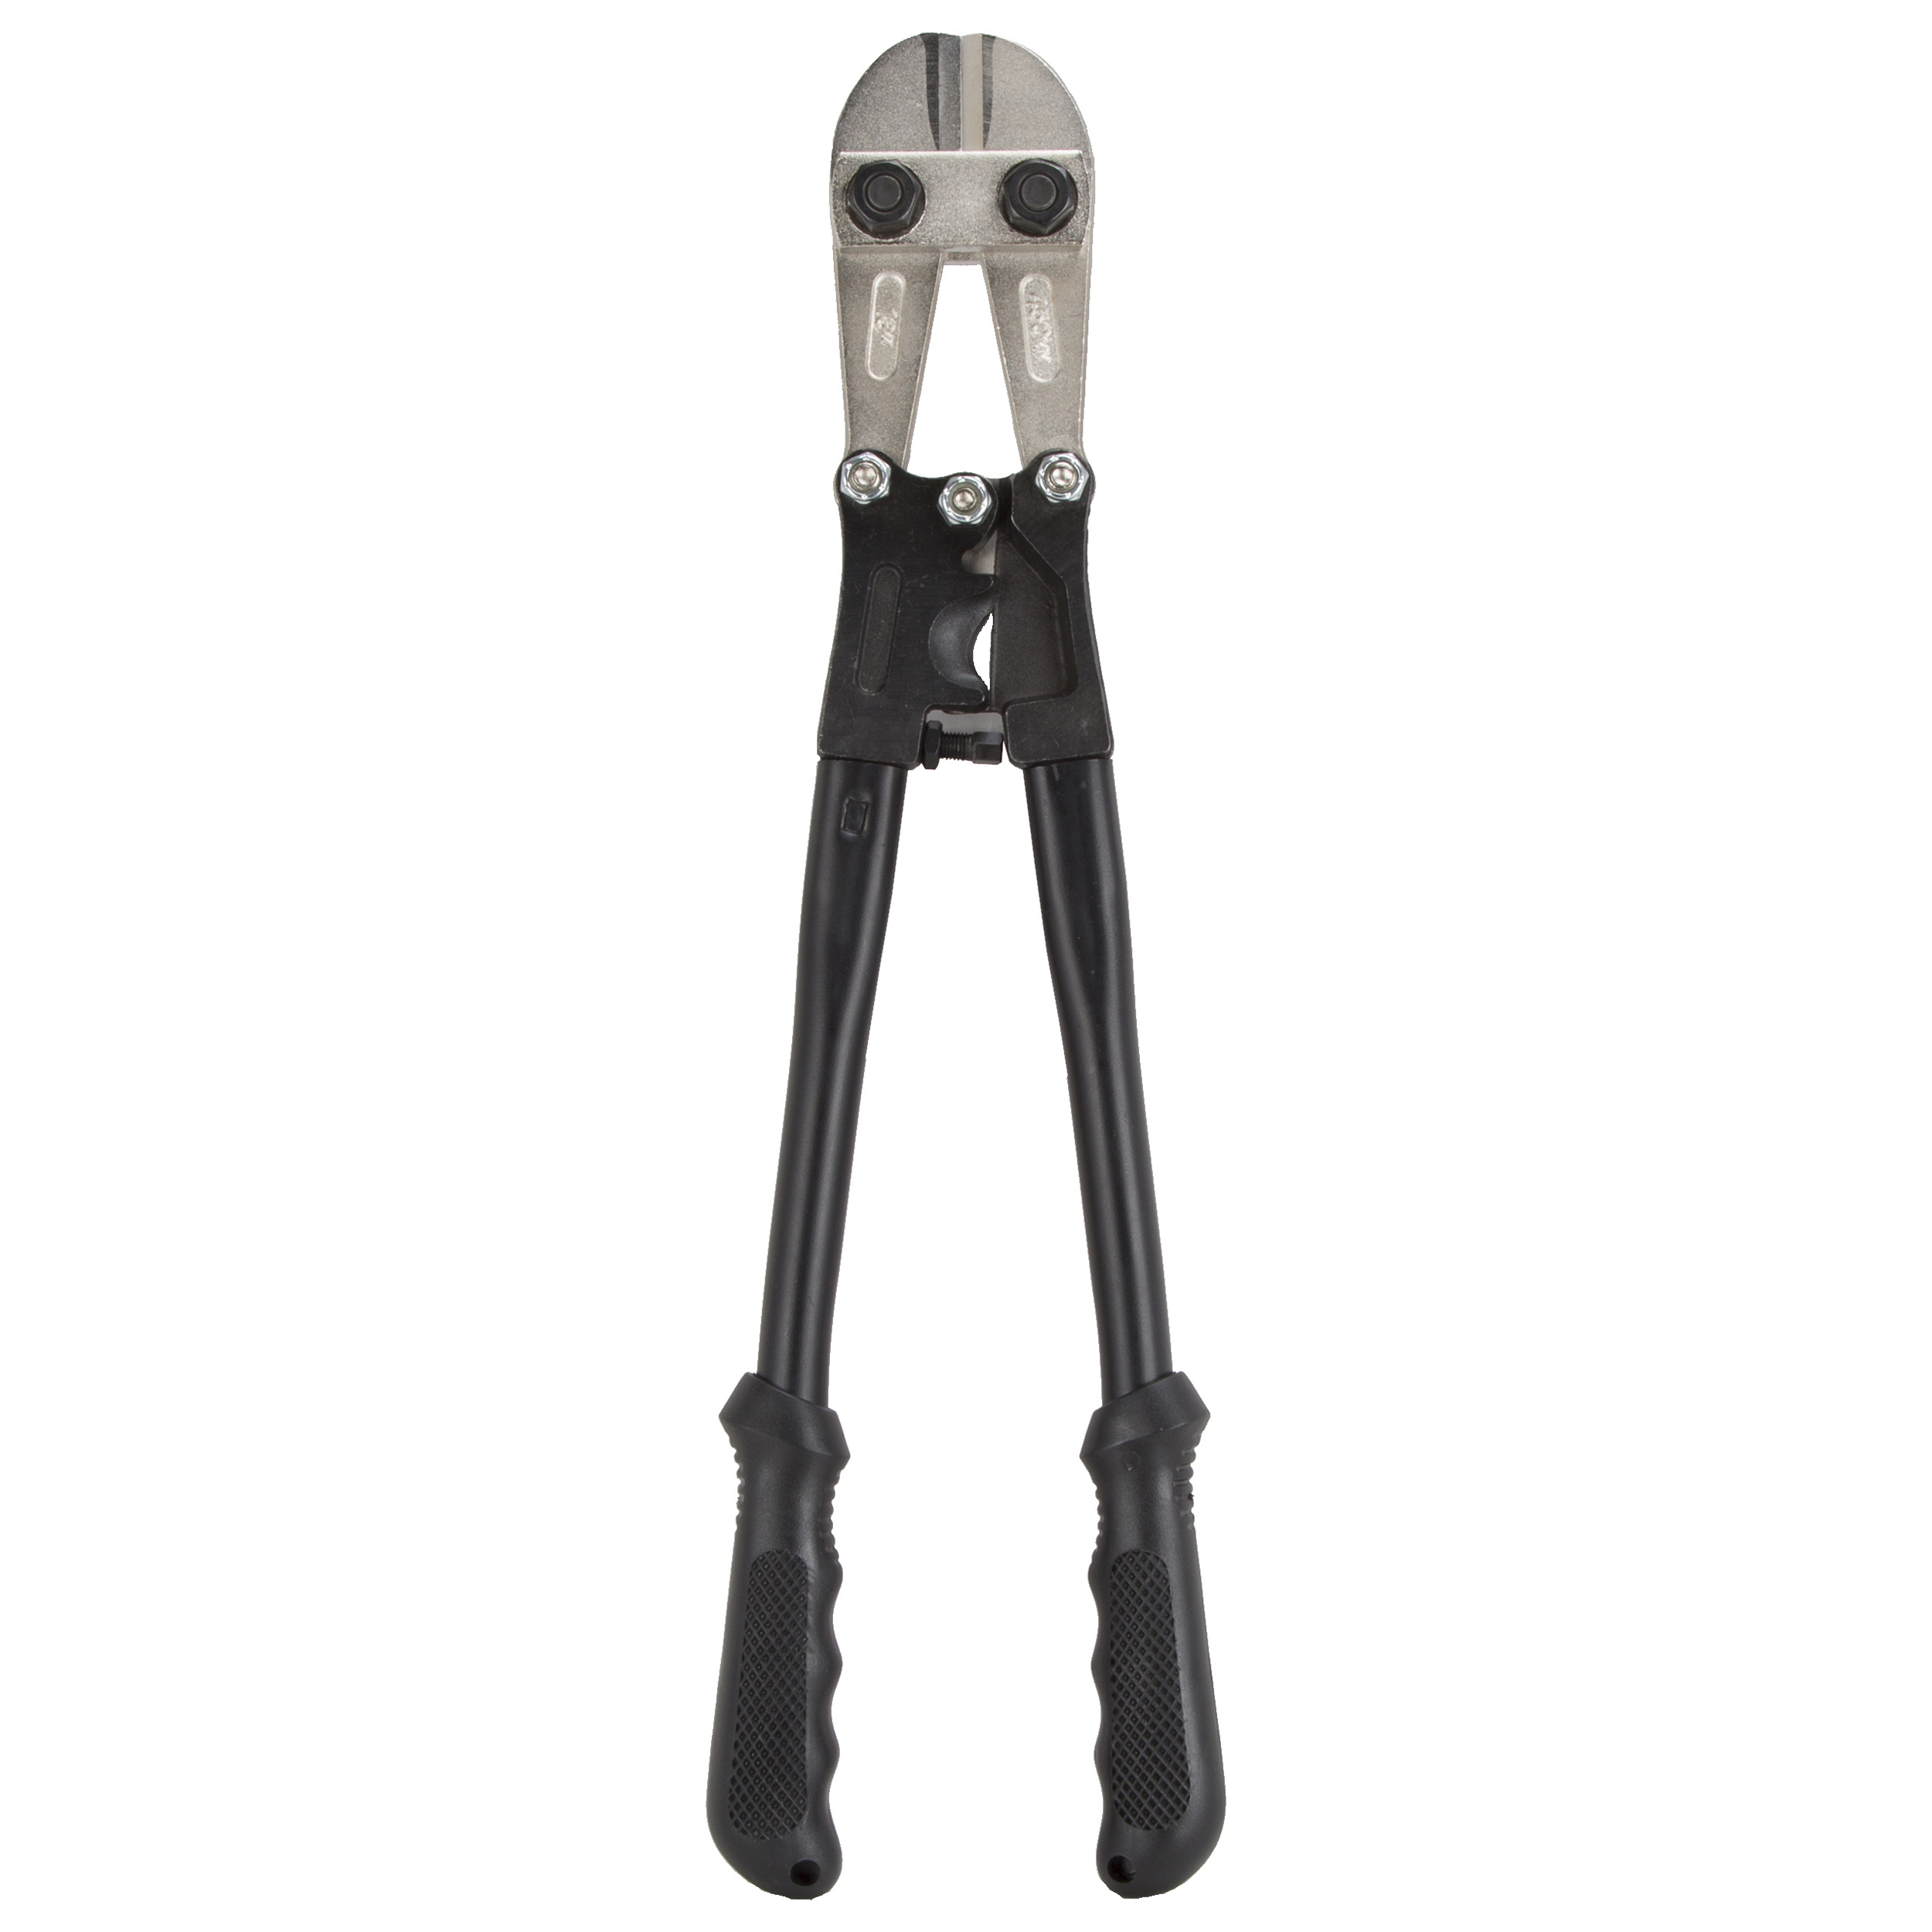 TC-C301M-18 Bolt Cutter, 1/4 in Bolt, 3/16 in Wire, 3/8 in Cable Cutting Capacity, 18 in OAL, Black Handle